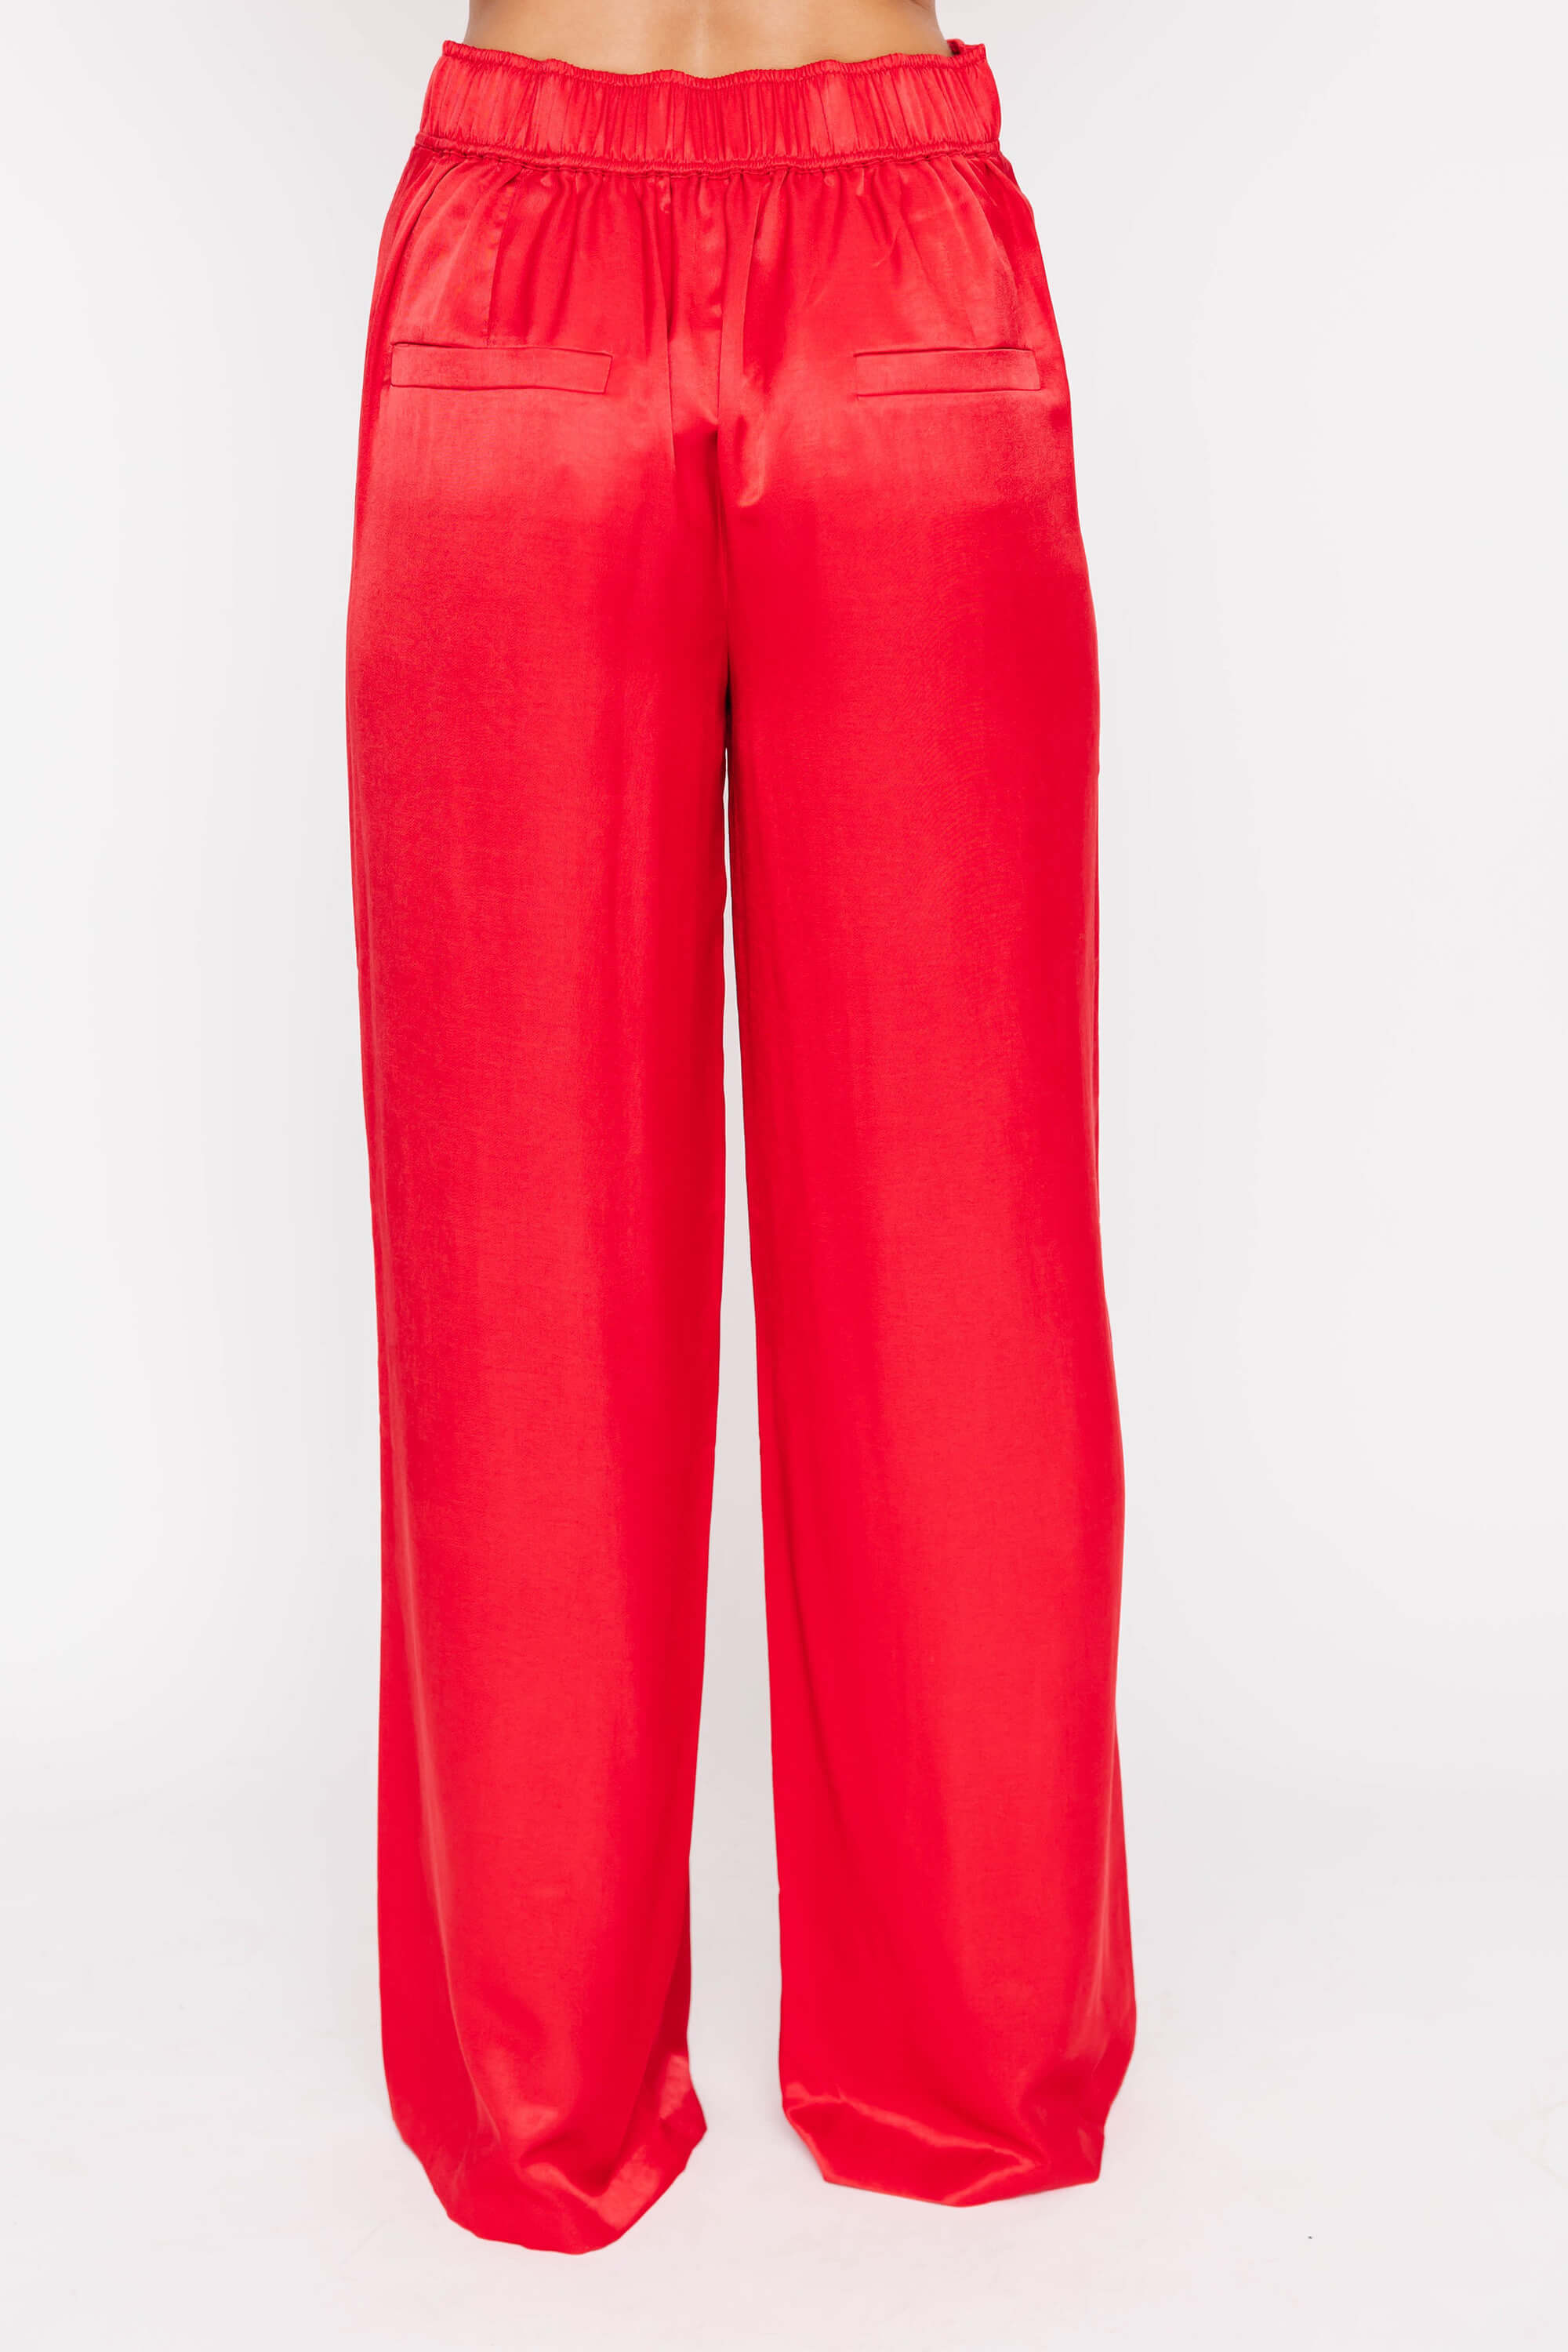 Holden Wide Leg Pant in Ruby Red